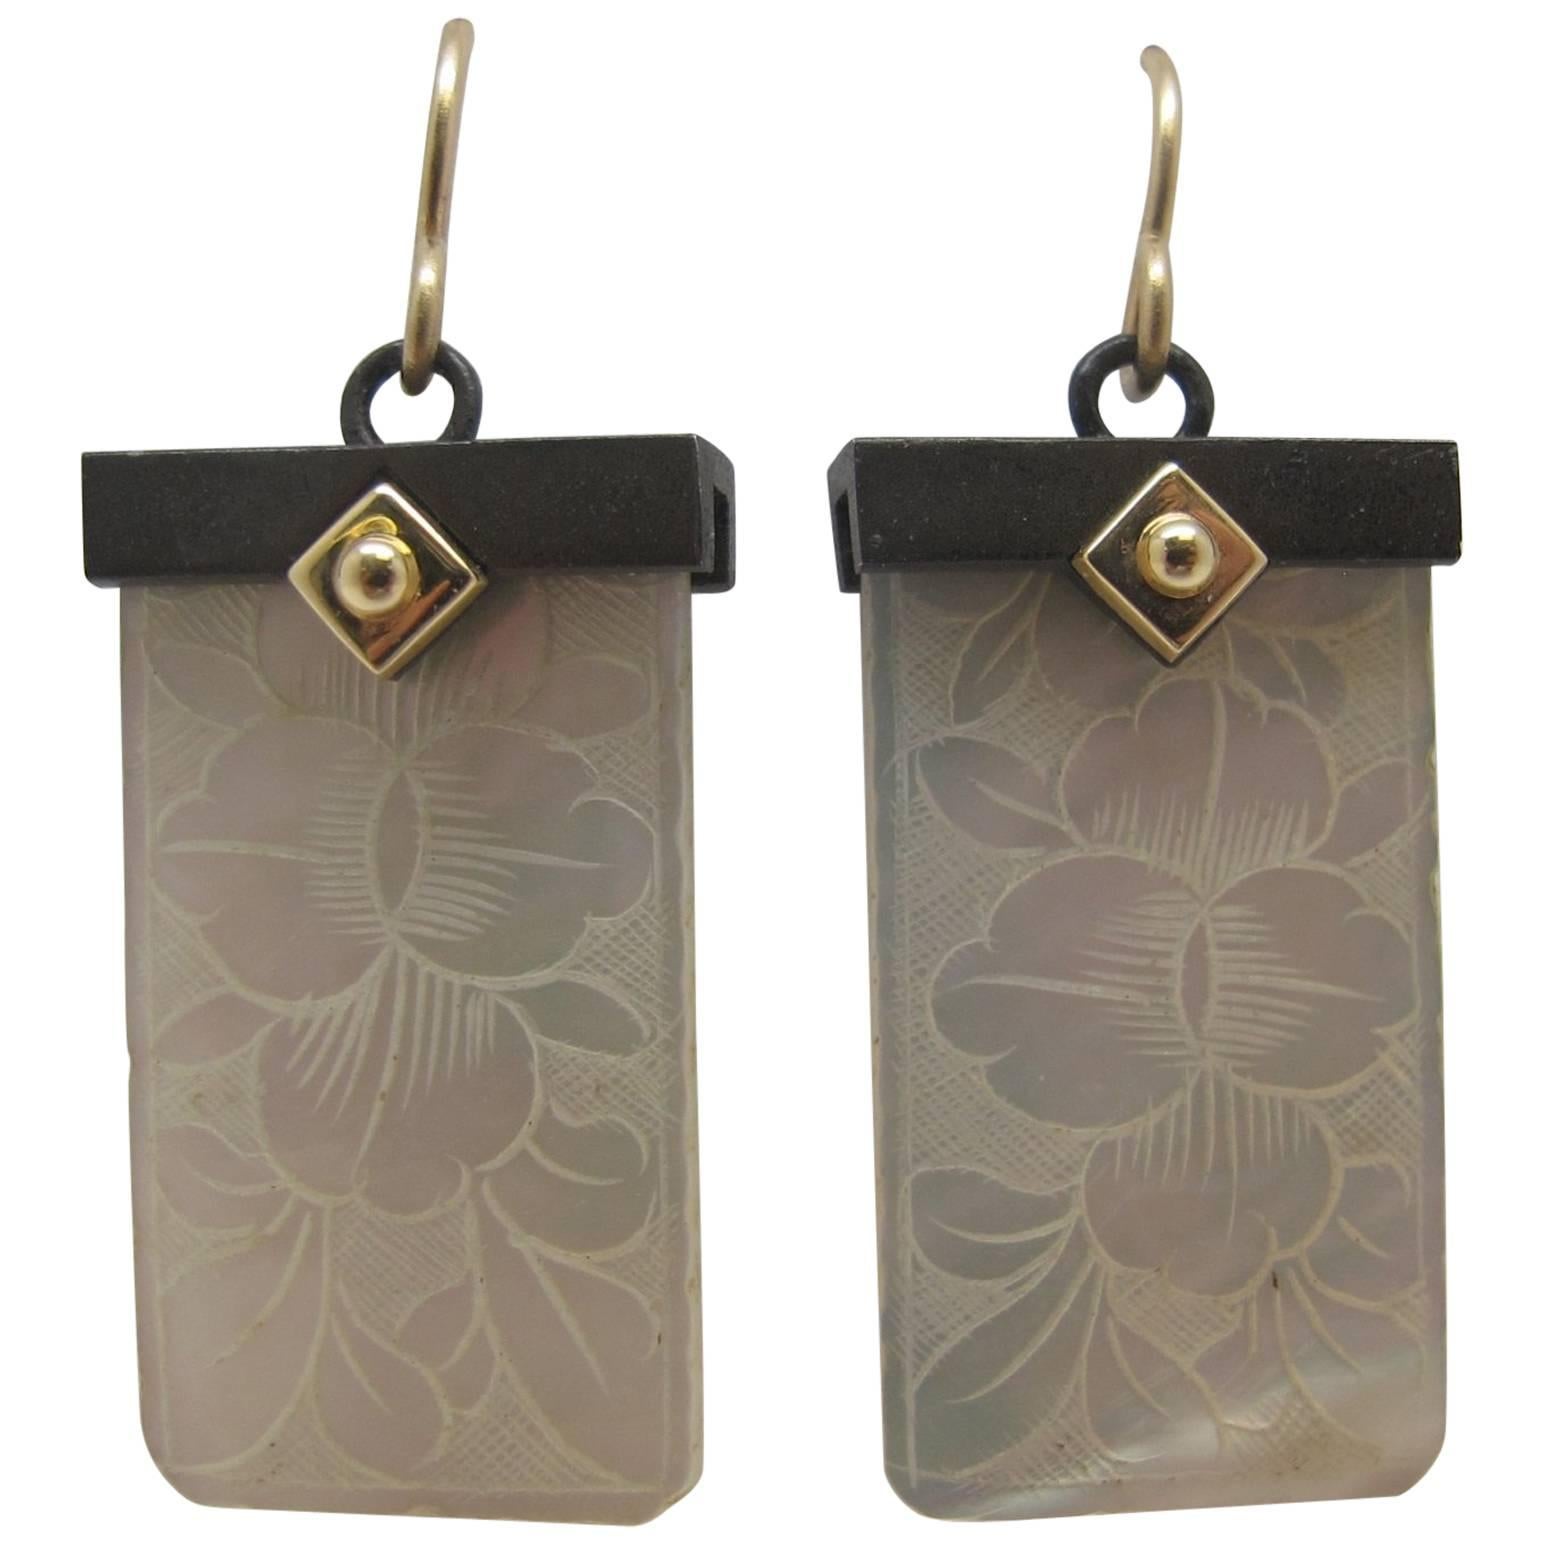 These earrings feature antique mother-of-pearl Chinese gambling counters with motifs dating back to the 18th Century. They were carved in China for export to Britain. The British used them like we would use a poker chip and played various games with